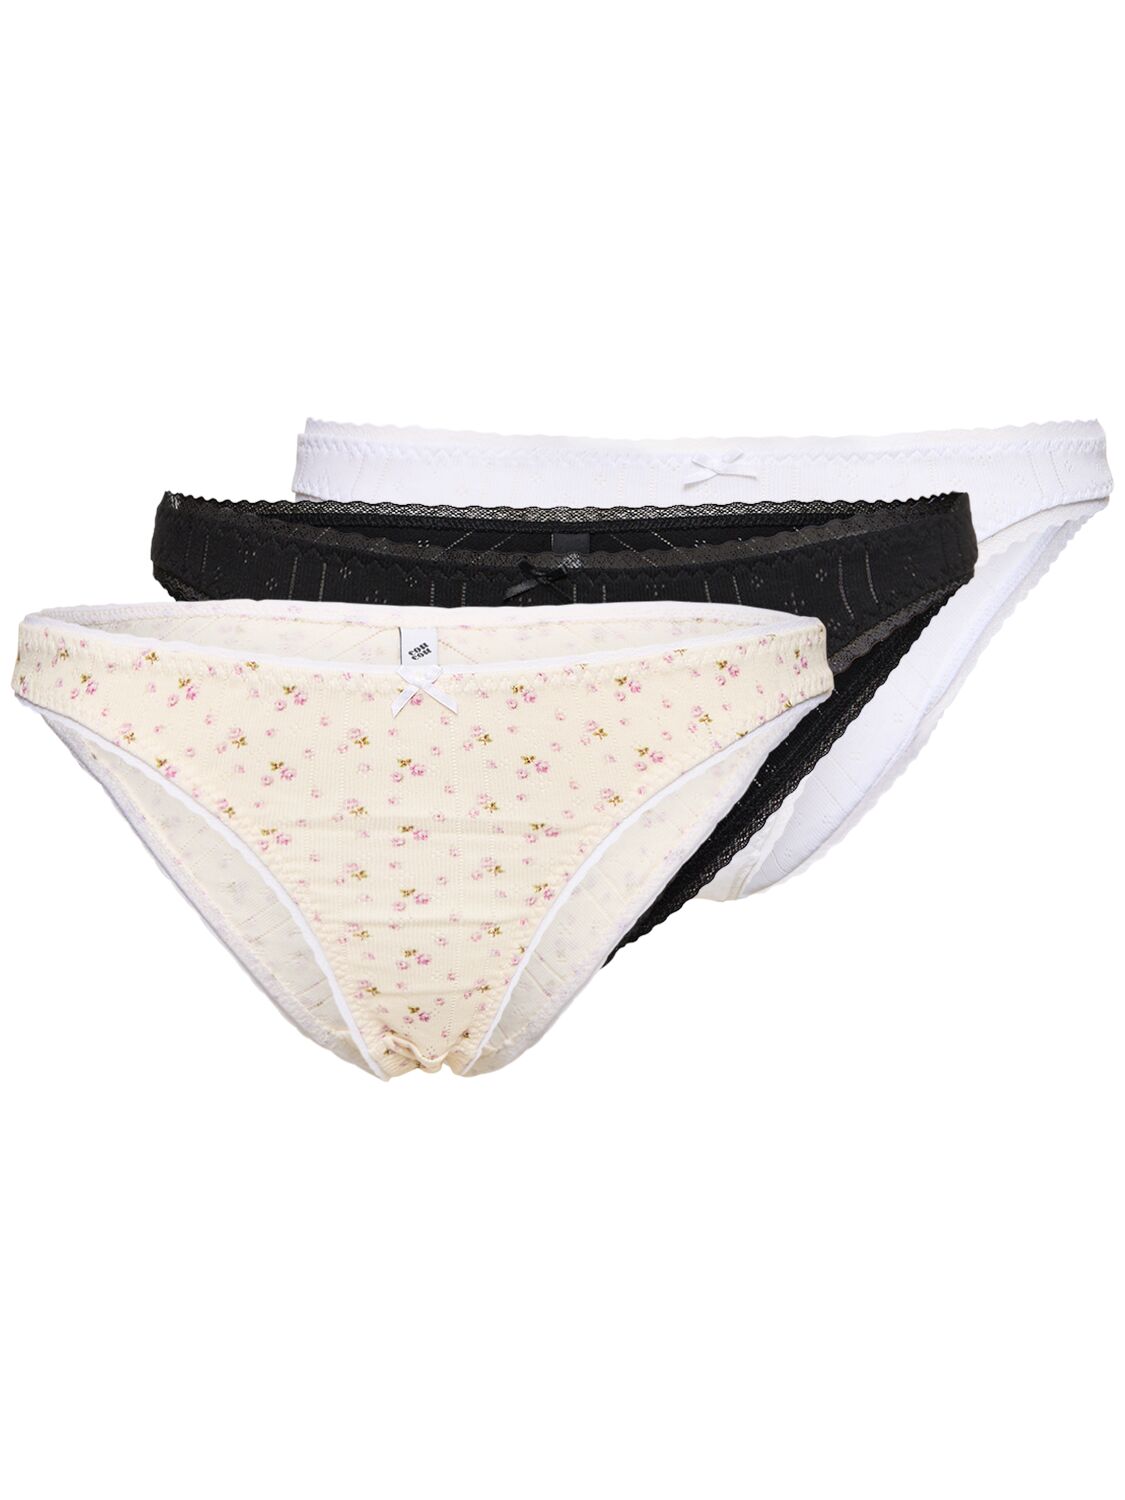 Cou Cou Set Of 3 The Pointelle High Rise Briefs In Black,white,rose